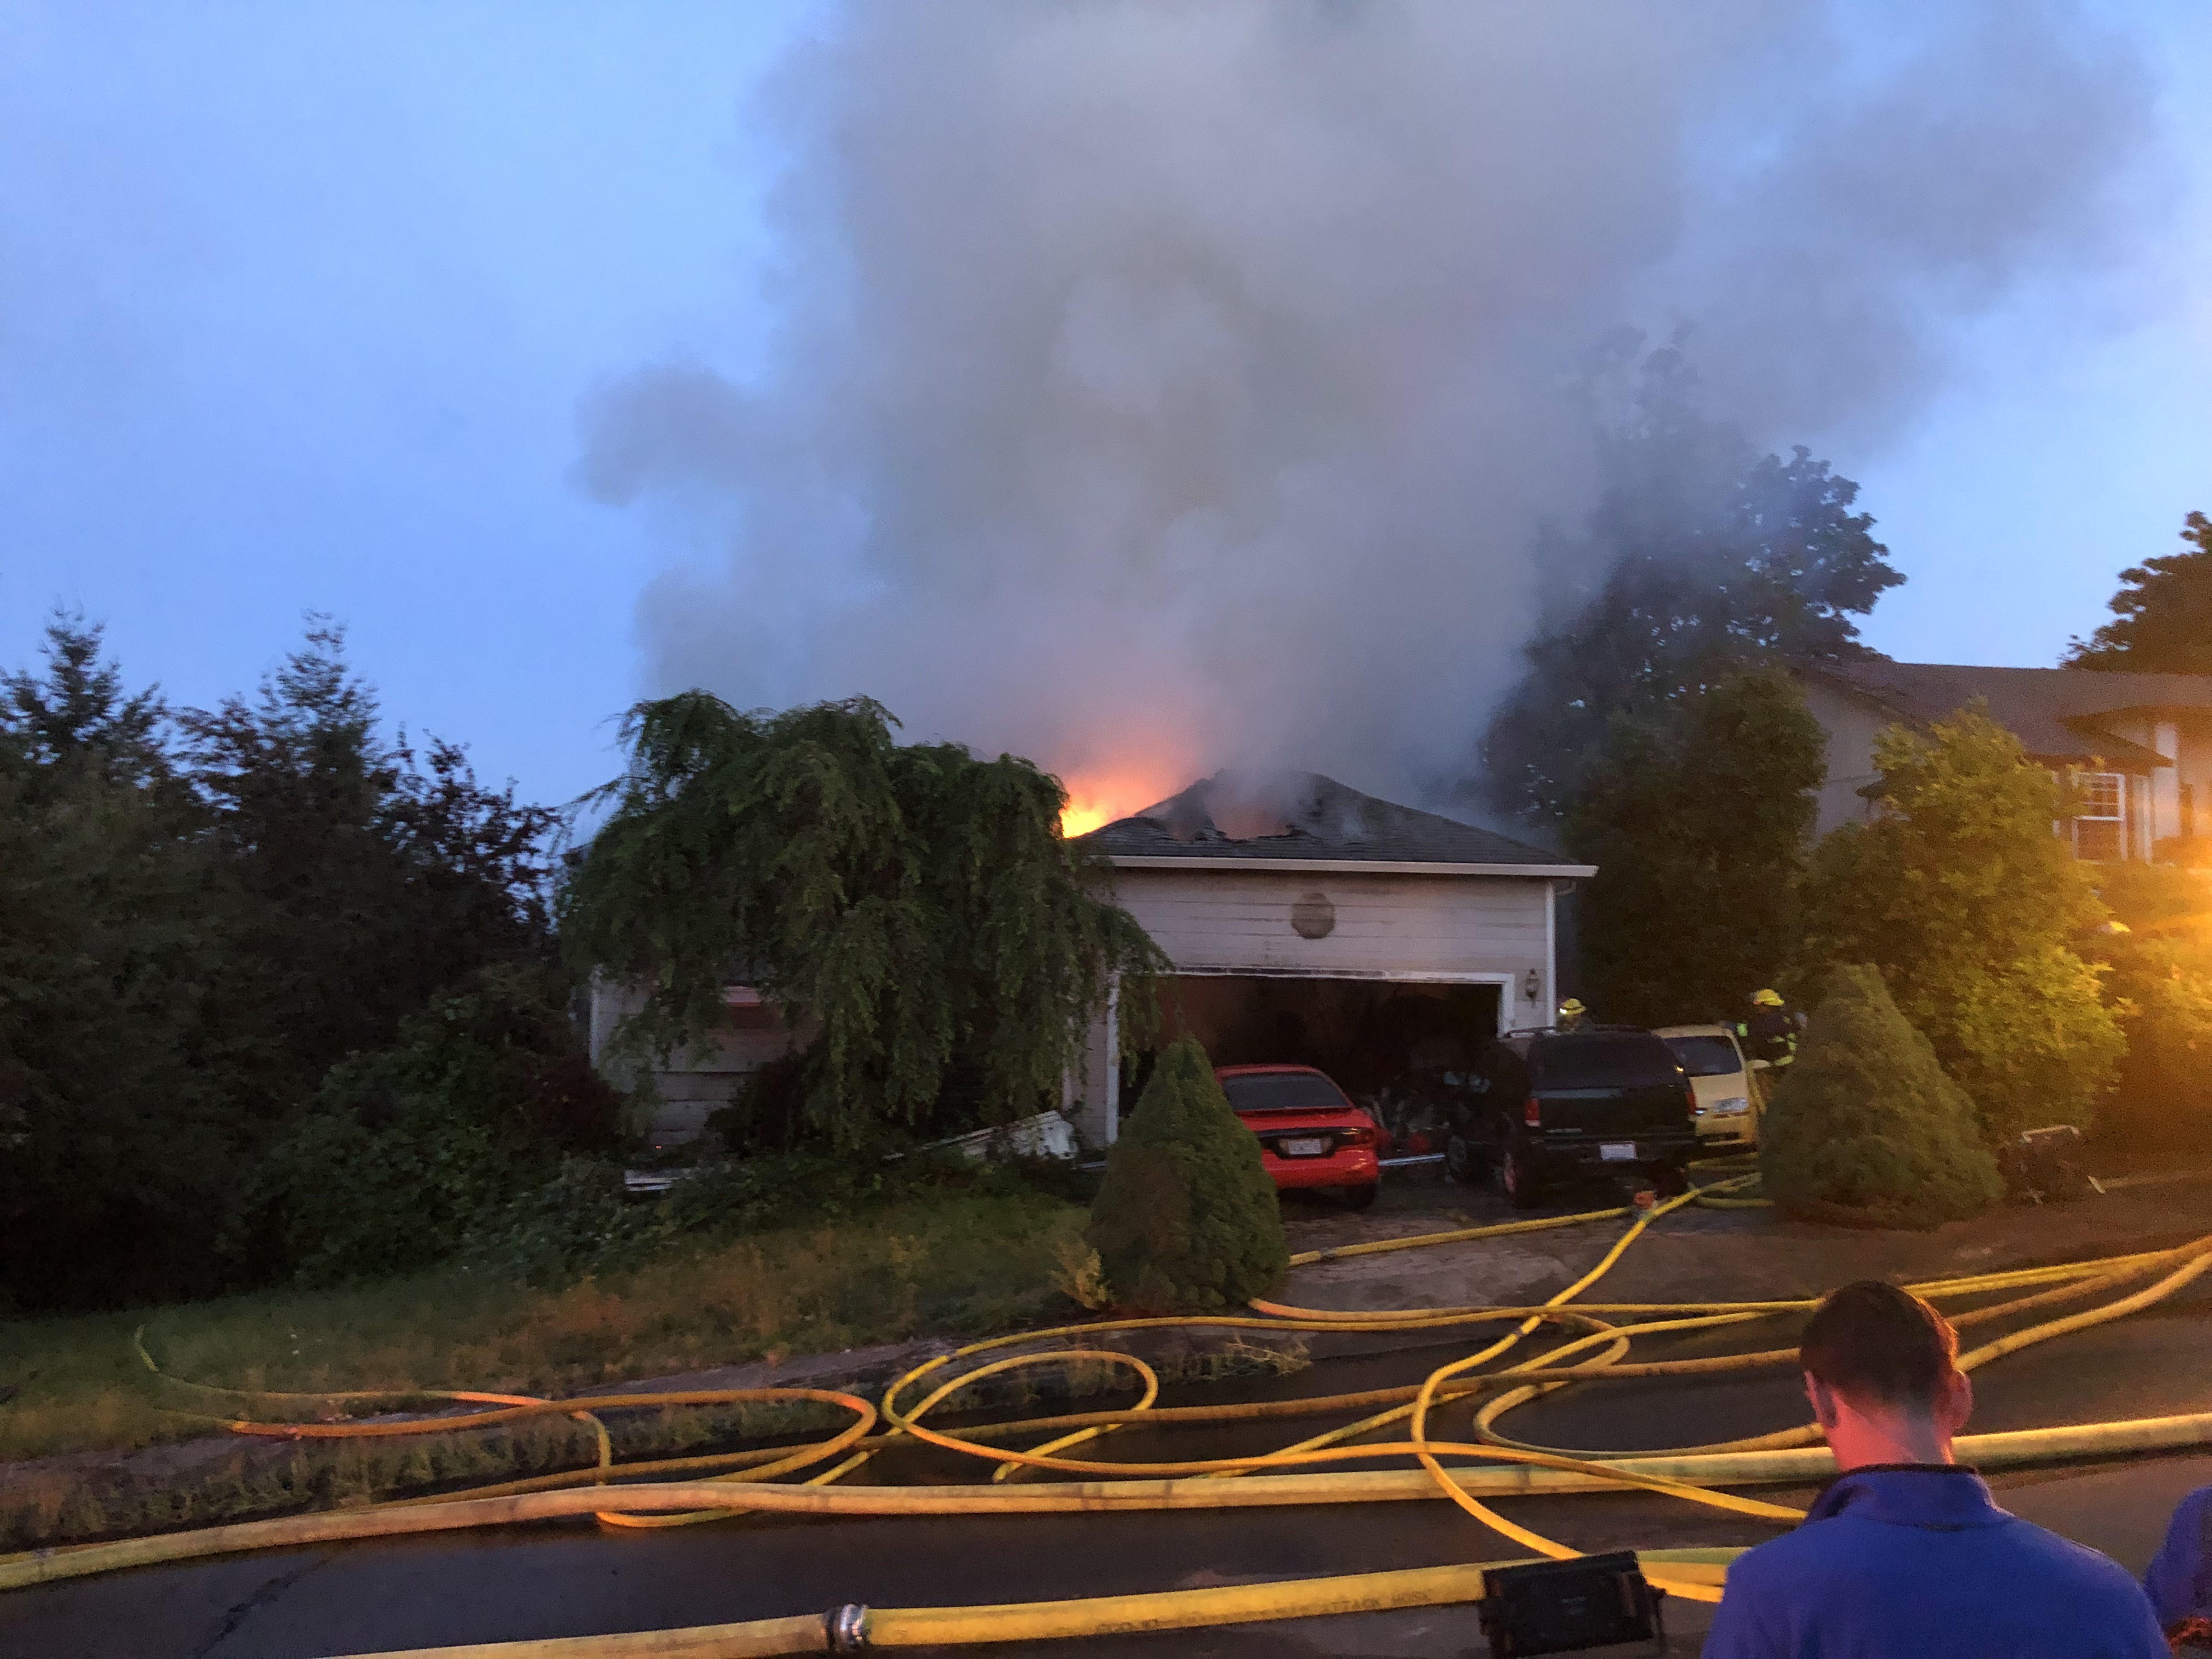 A Washougal house burns on Friday morning. The house was declared a total loss, and the occupant was hospitalized with burns. (Photo courtesy Camas-Washougal Fire Department)